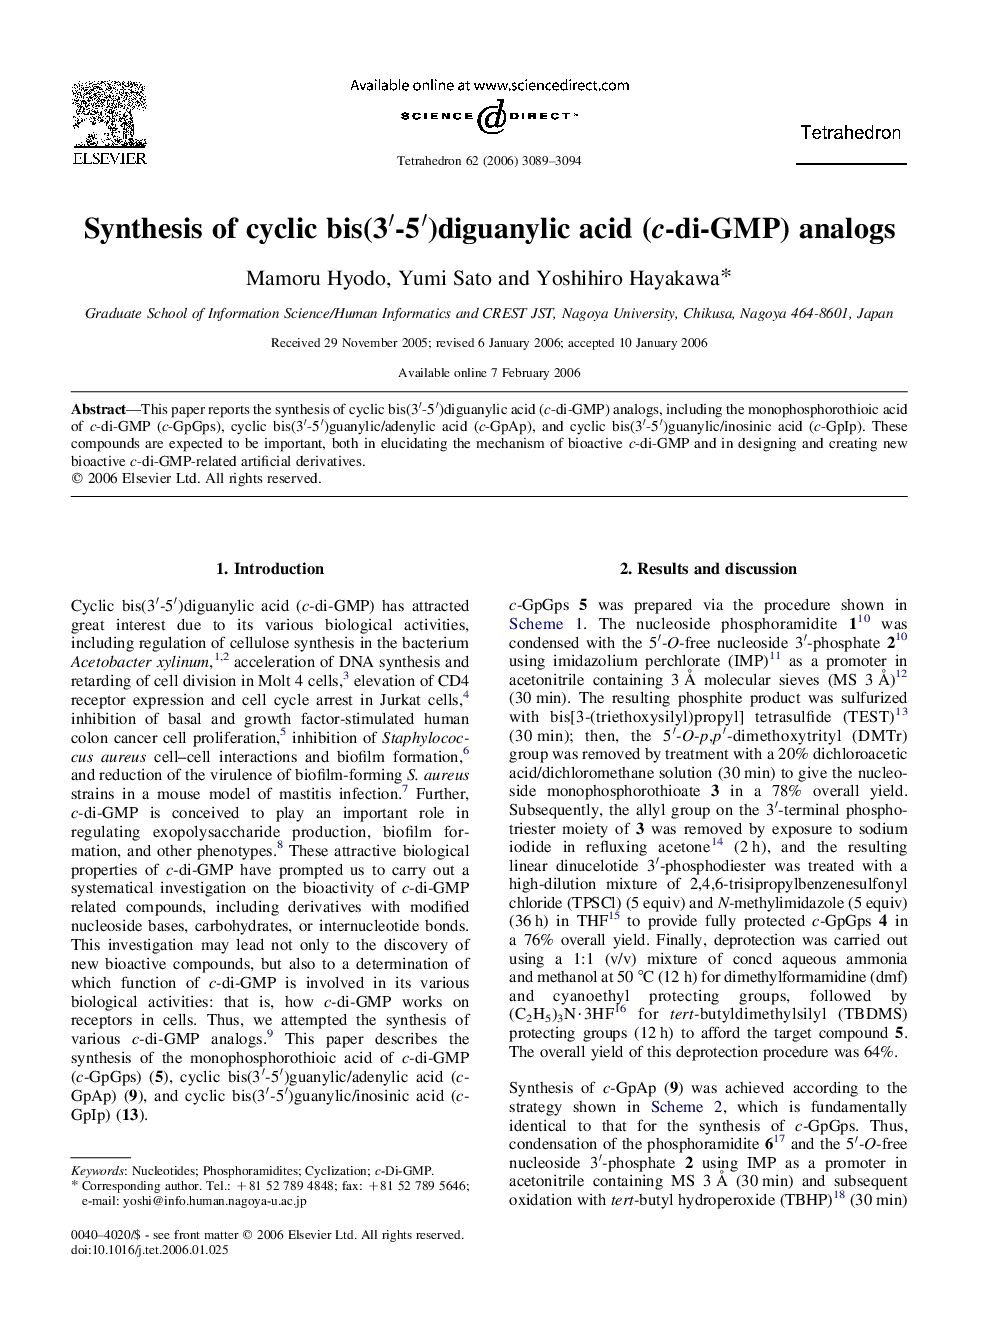 Synthesis of cyclic bis(3â²-5â²)diguanylic acid (c-di-GMP) analogs